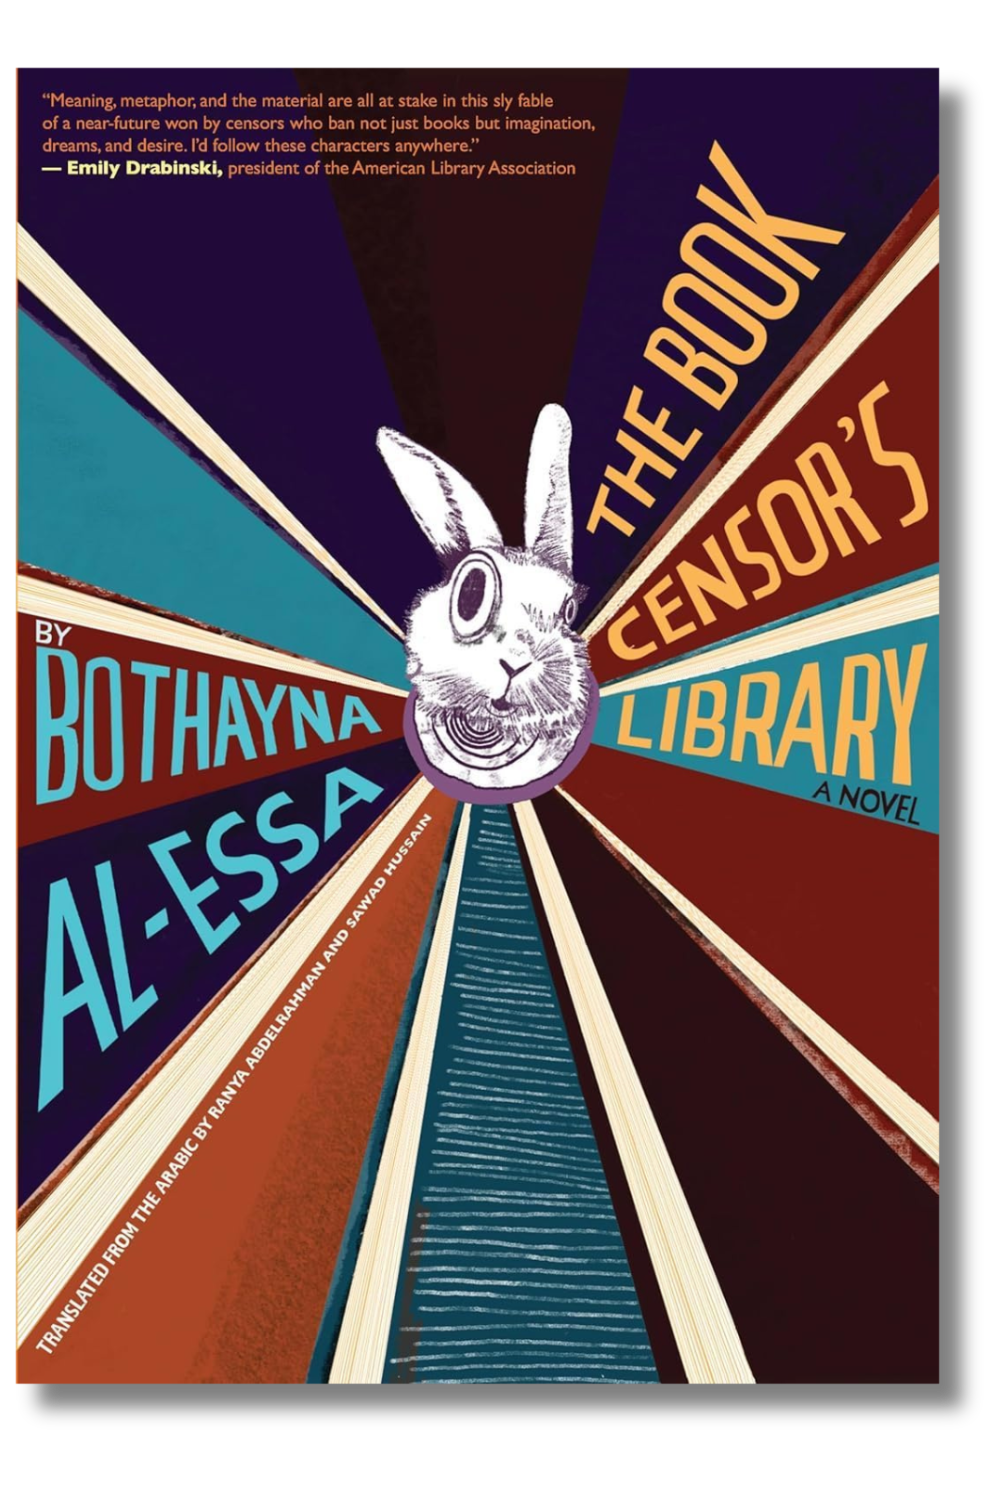 The cover of "The Book Censor's Library" by Bothayna Al-Essa, tr. by Sawad Hussain and Ranya Abdelrahman